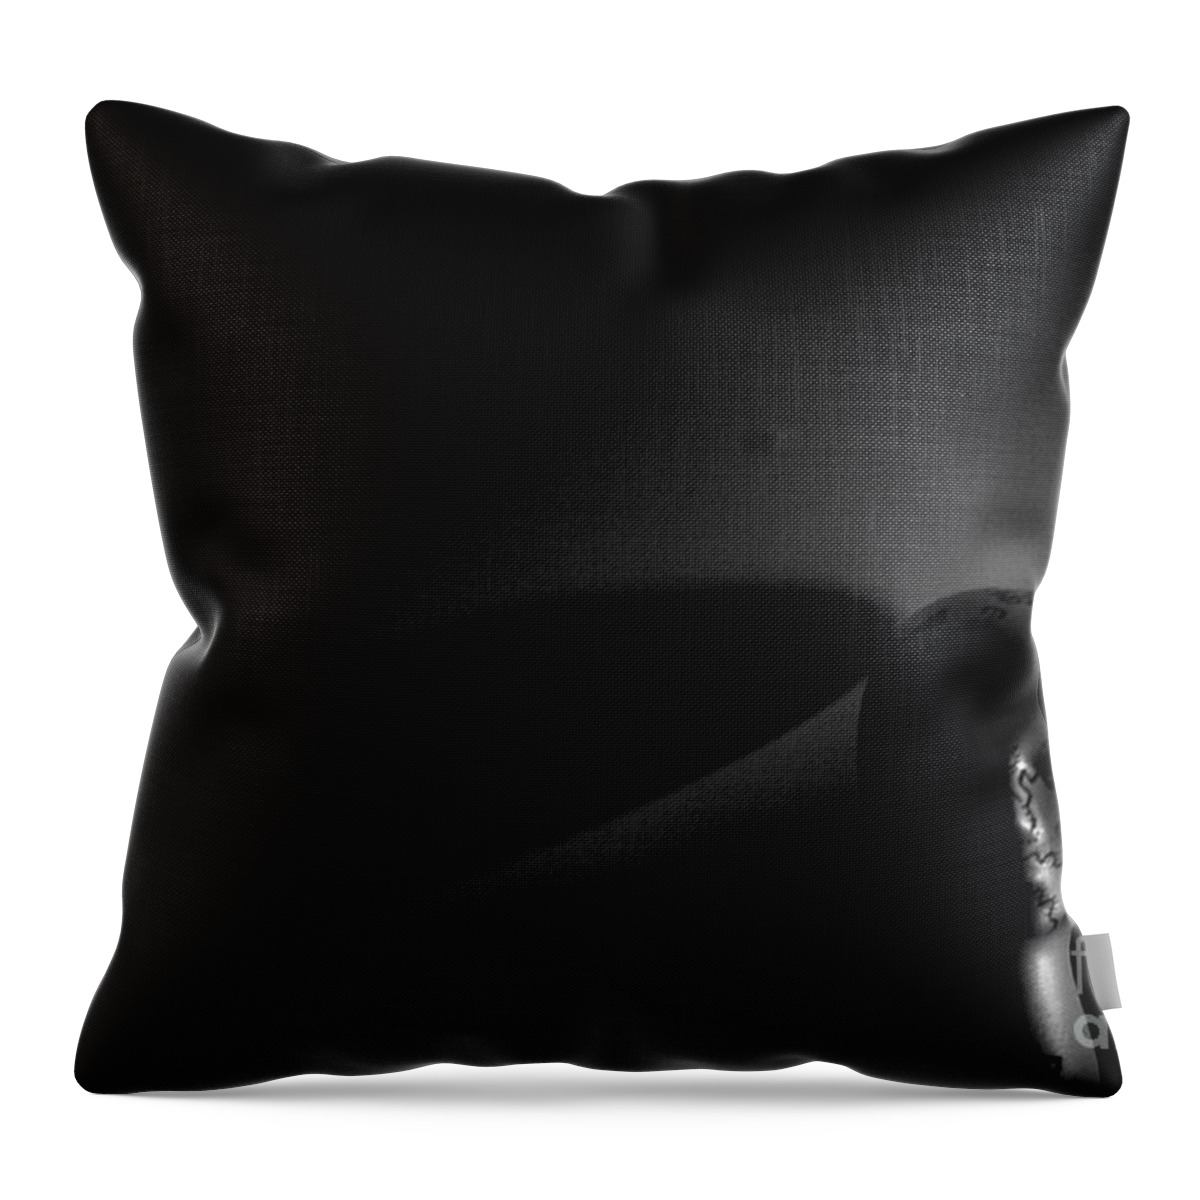 Shadows Throw Pillow featuring the photograph Shadows Of The Mind by Steven Macanka